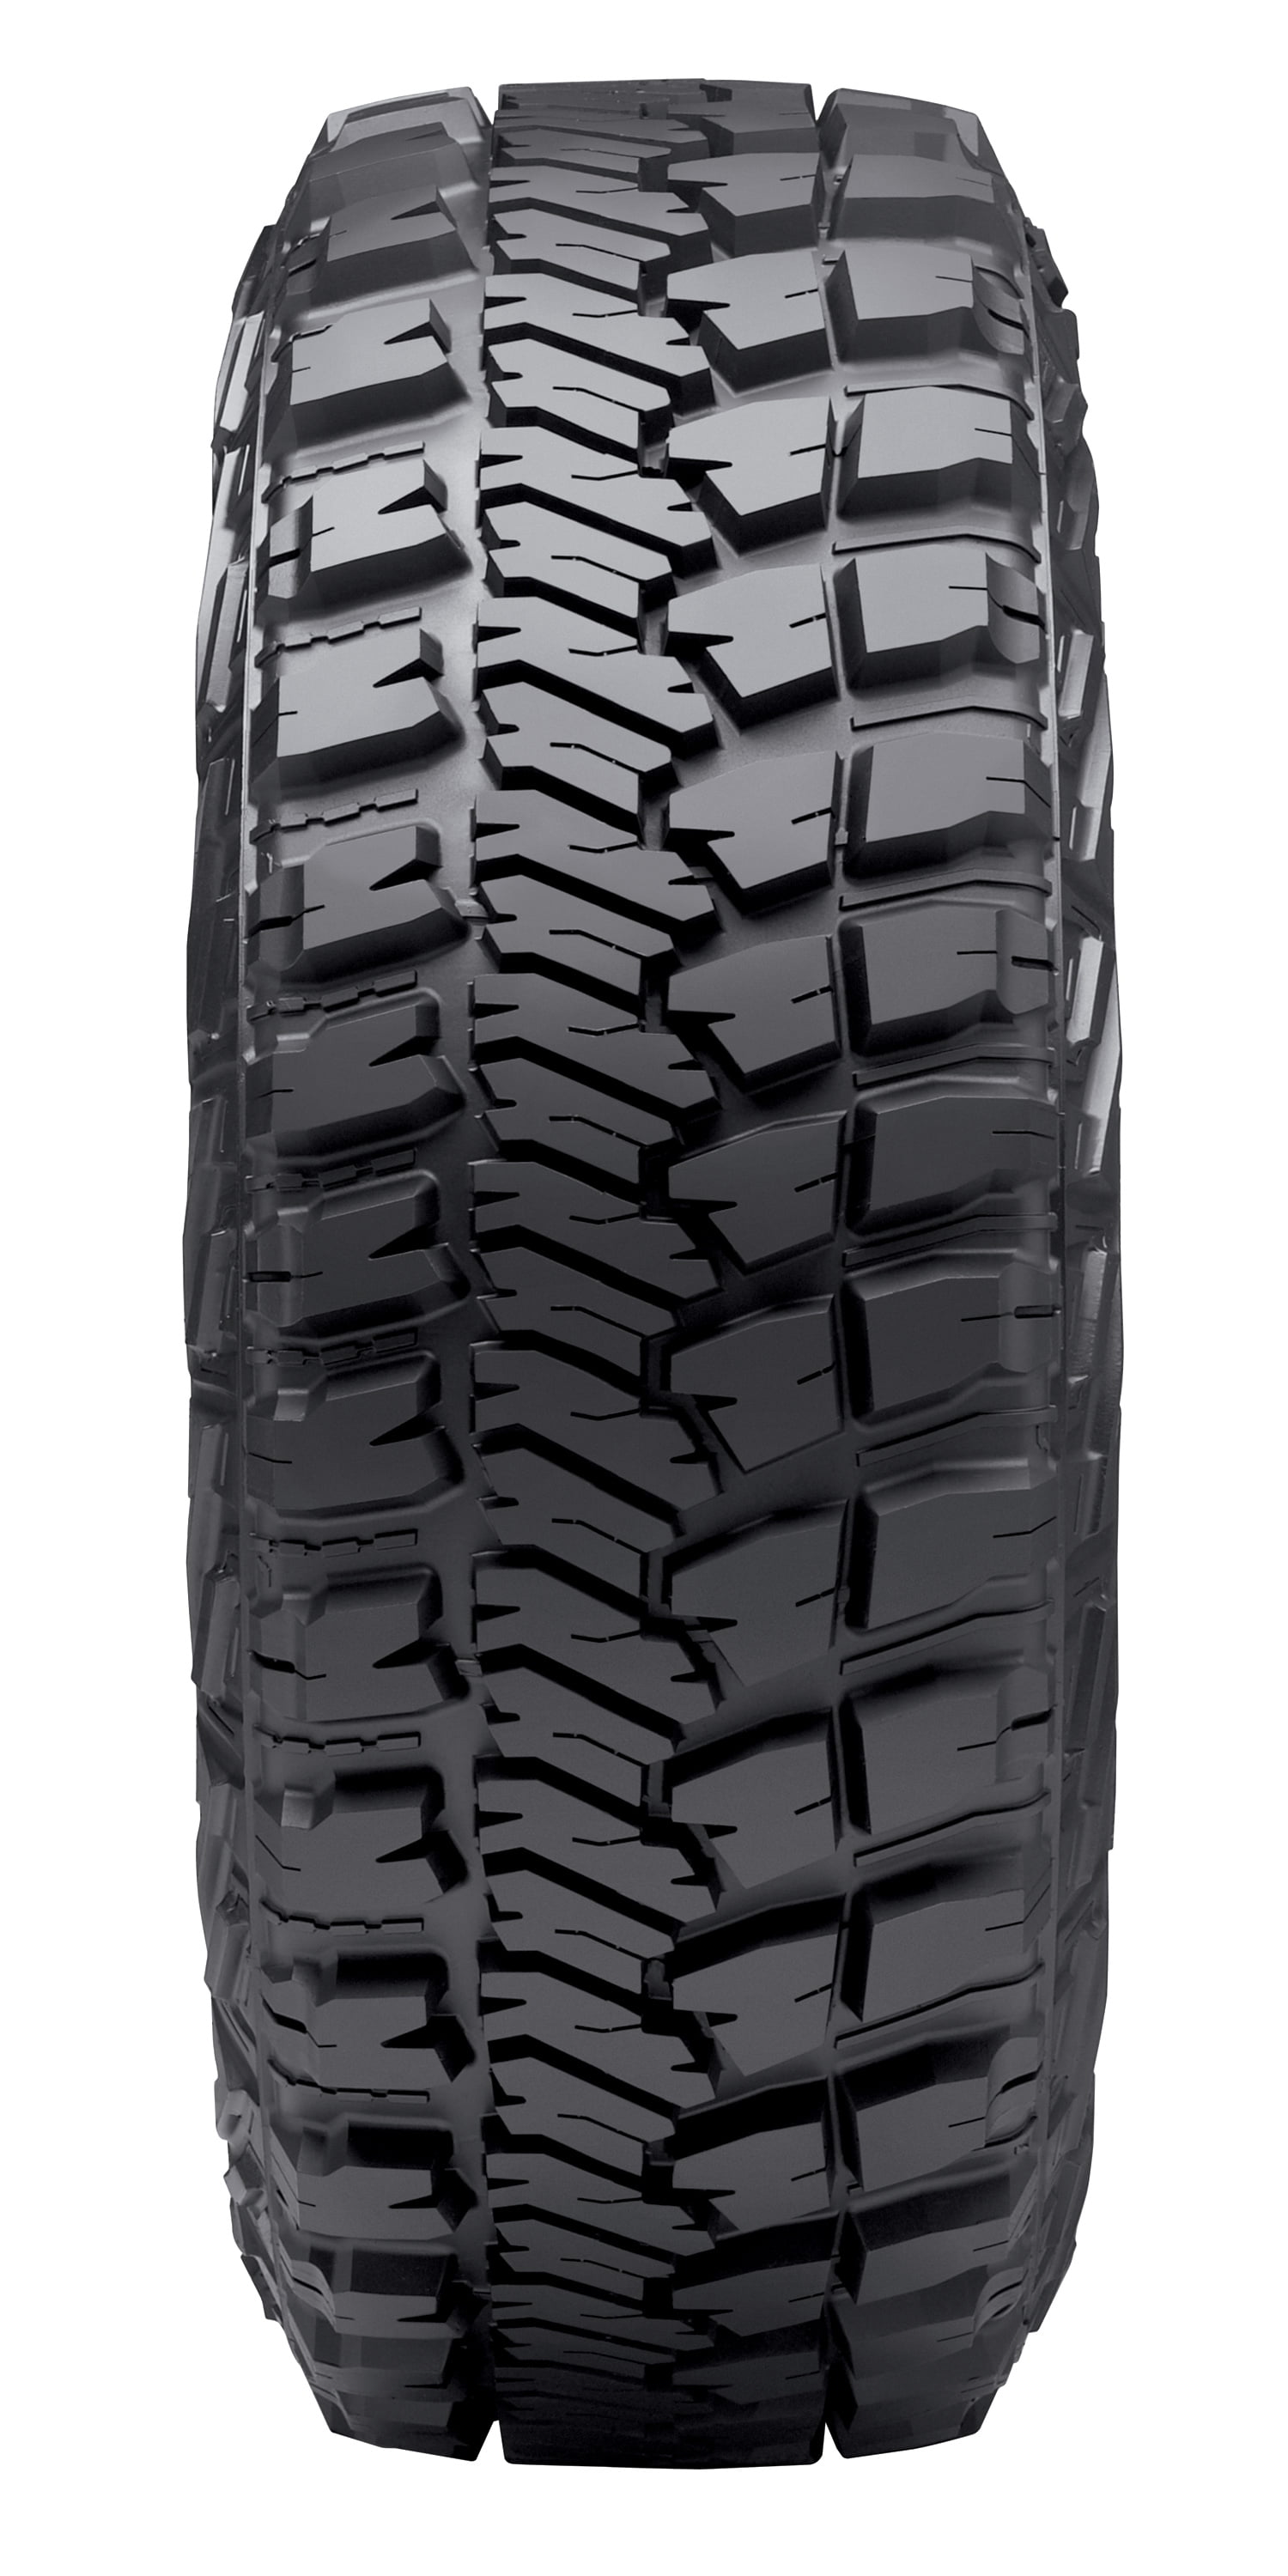 Goodyear Wrangler MT/R With Kevlar LT  Load C 6 Ply M/T Mud Tire  